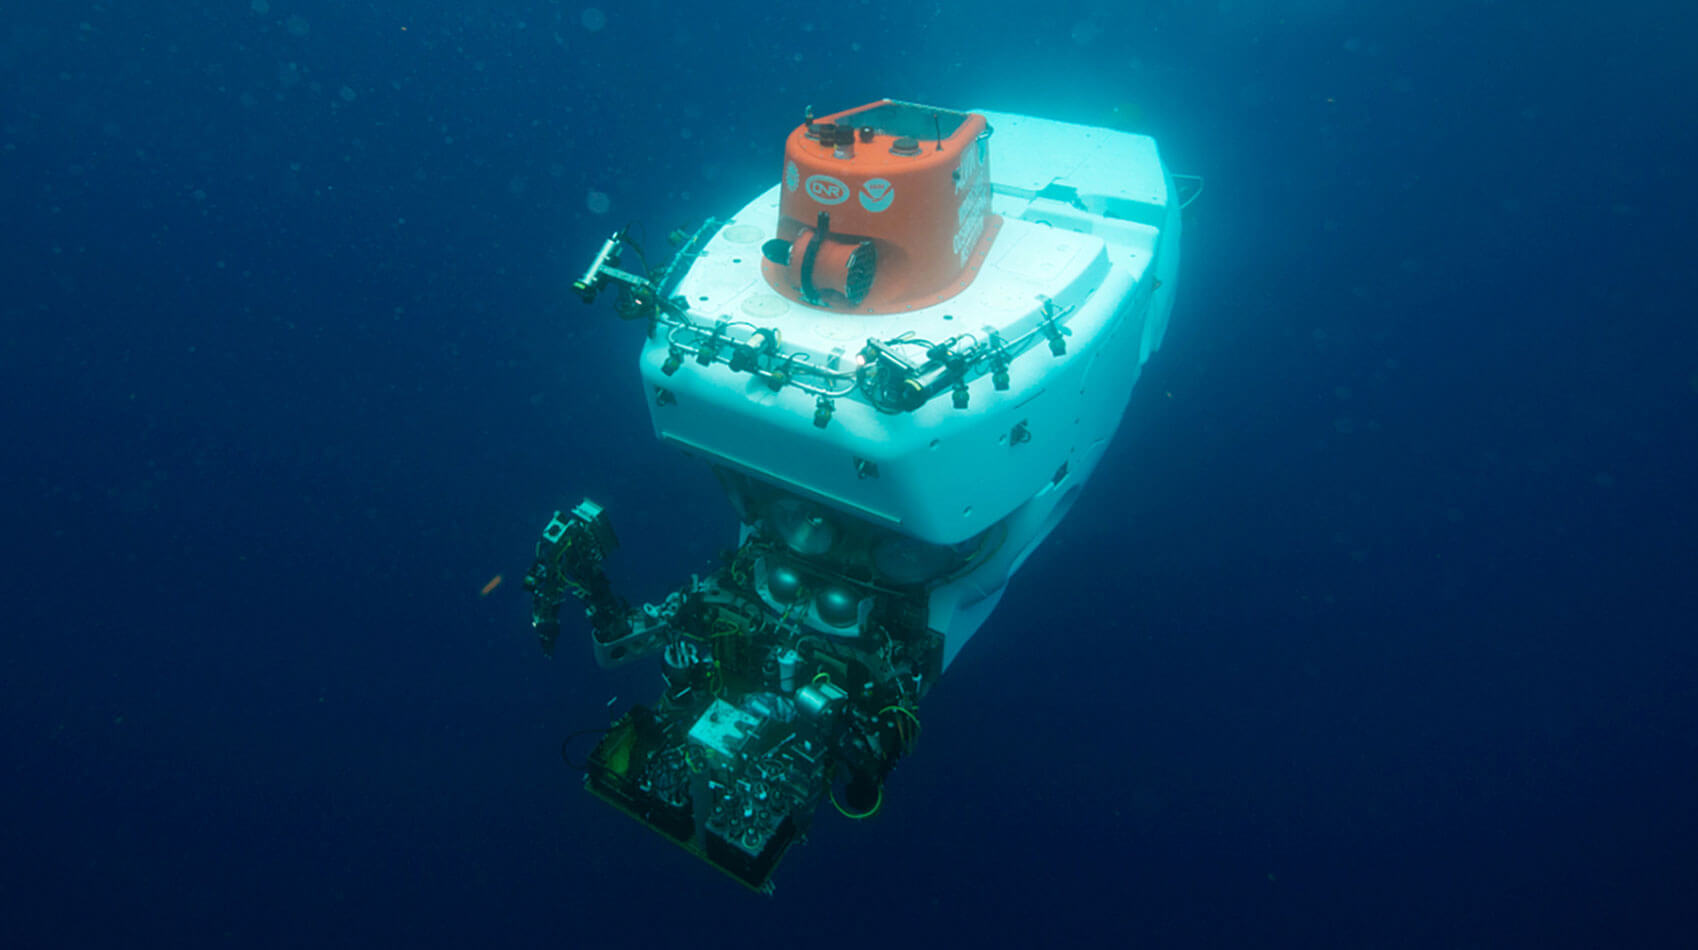 Alvin, which is operated by Woods Hole Oceanographic Institution (WHOI), has been in operation since 1964. The human occupied vehicle can carry two scientists and one pilot for each dive.